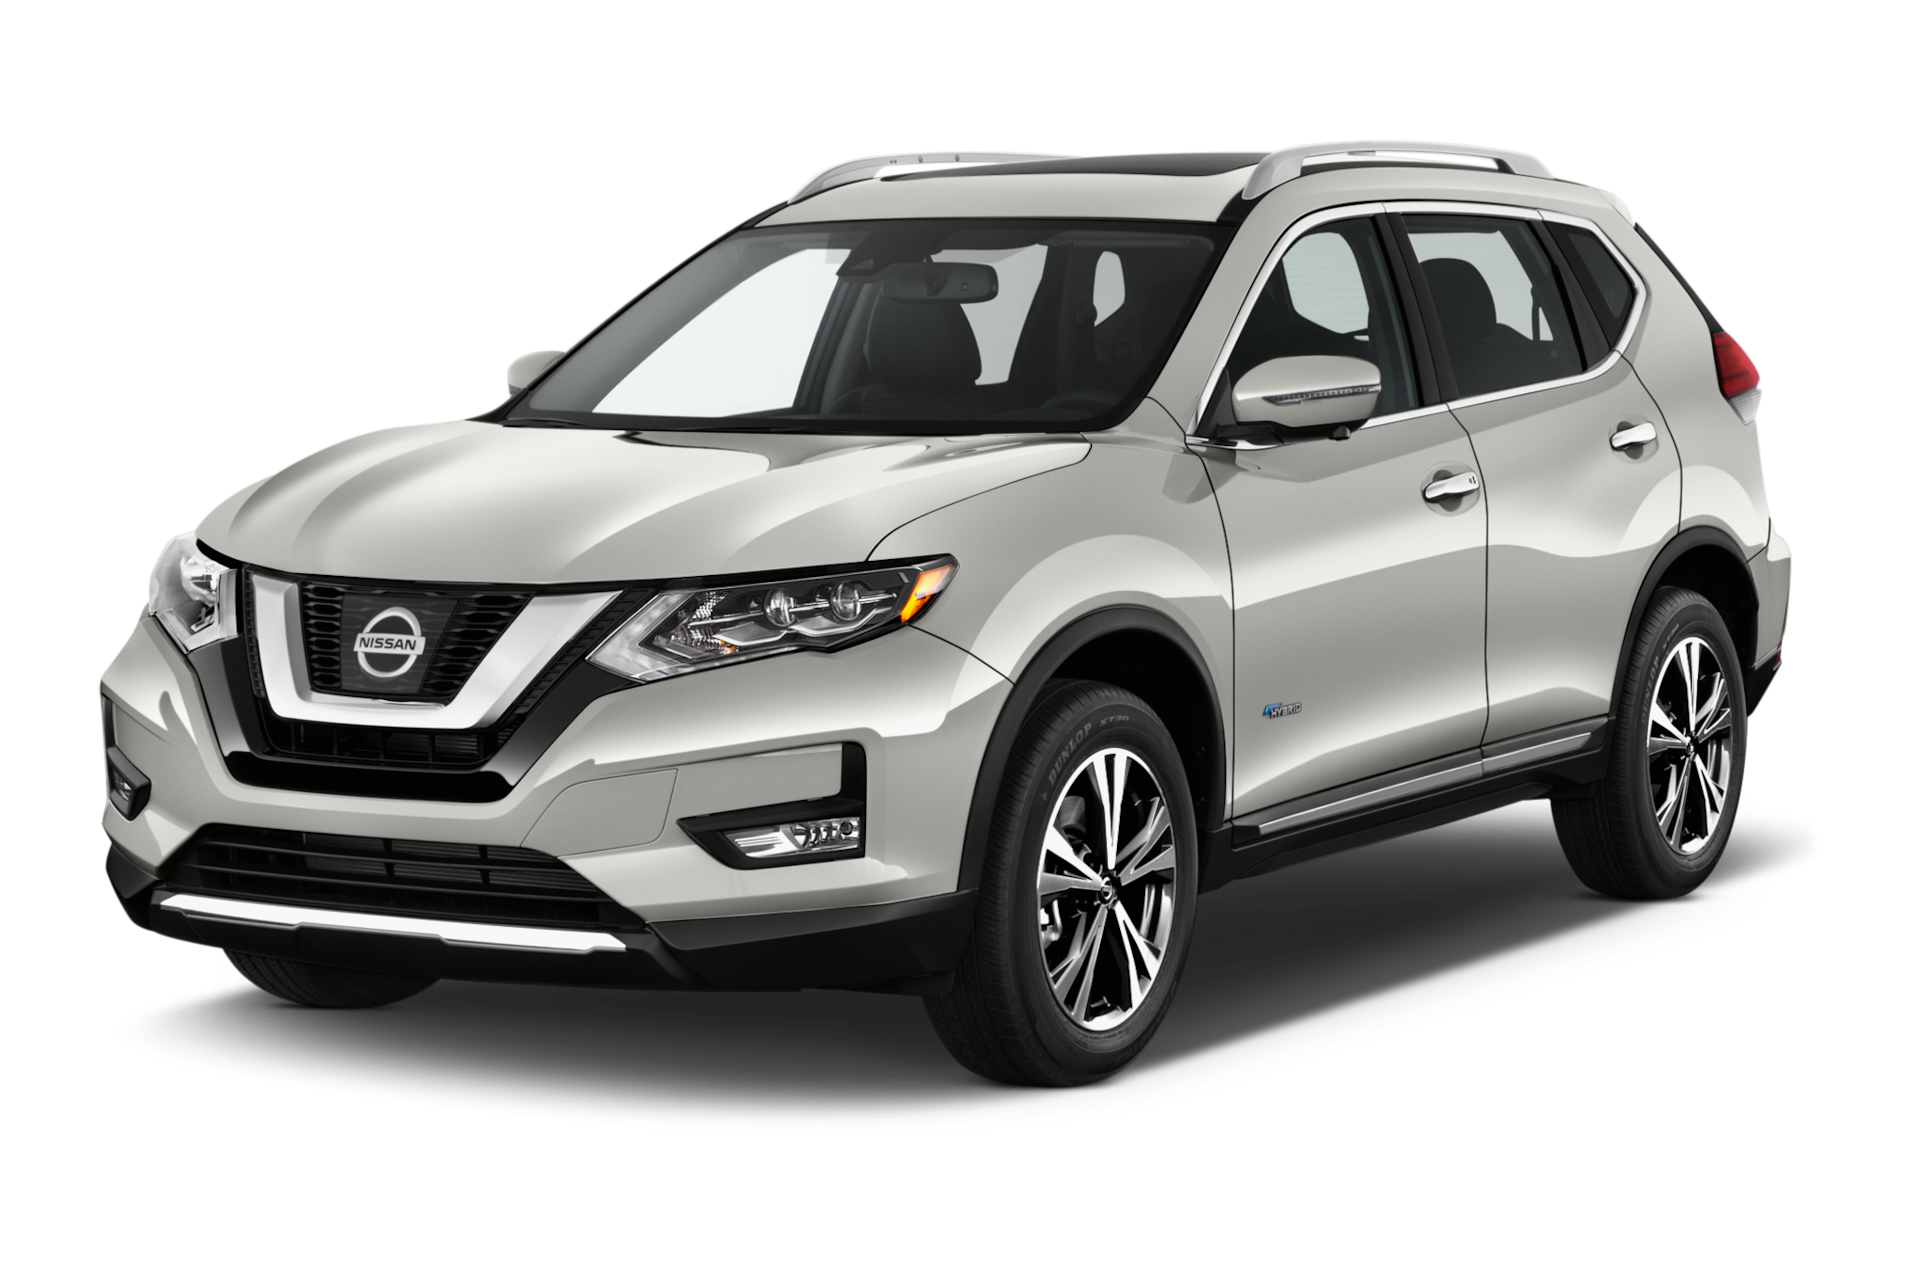 2019 Nissan Rogue Prices, Reviews, and Photos - MotorTrend